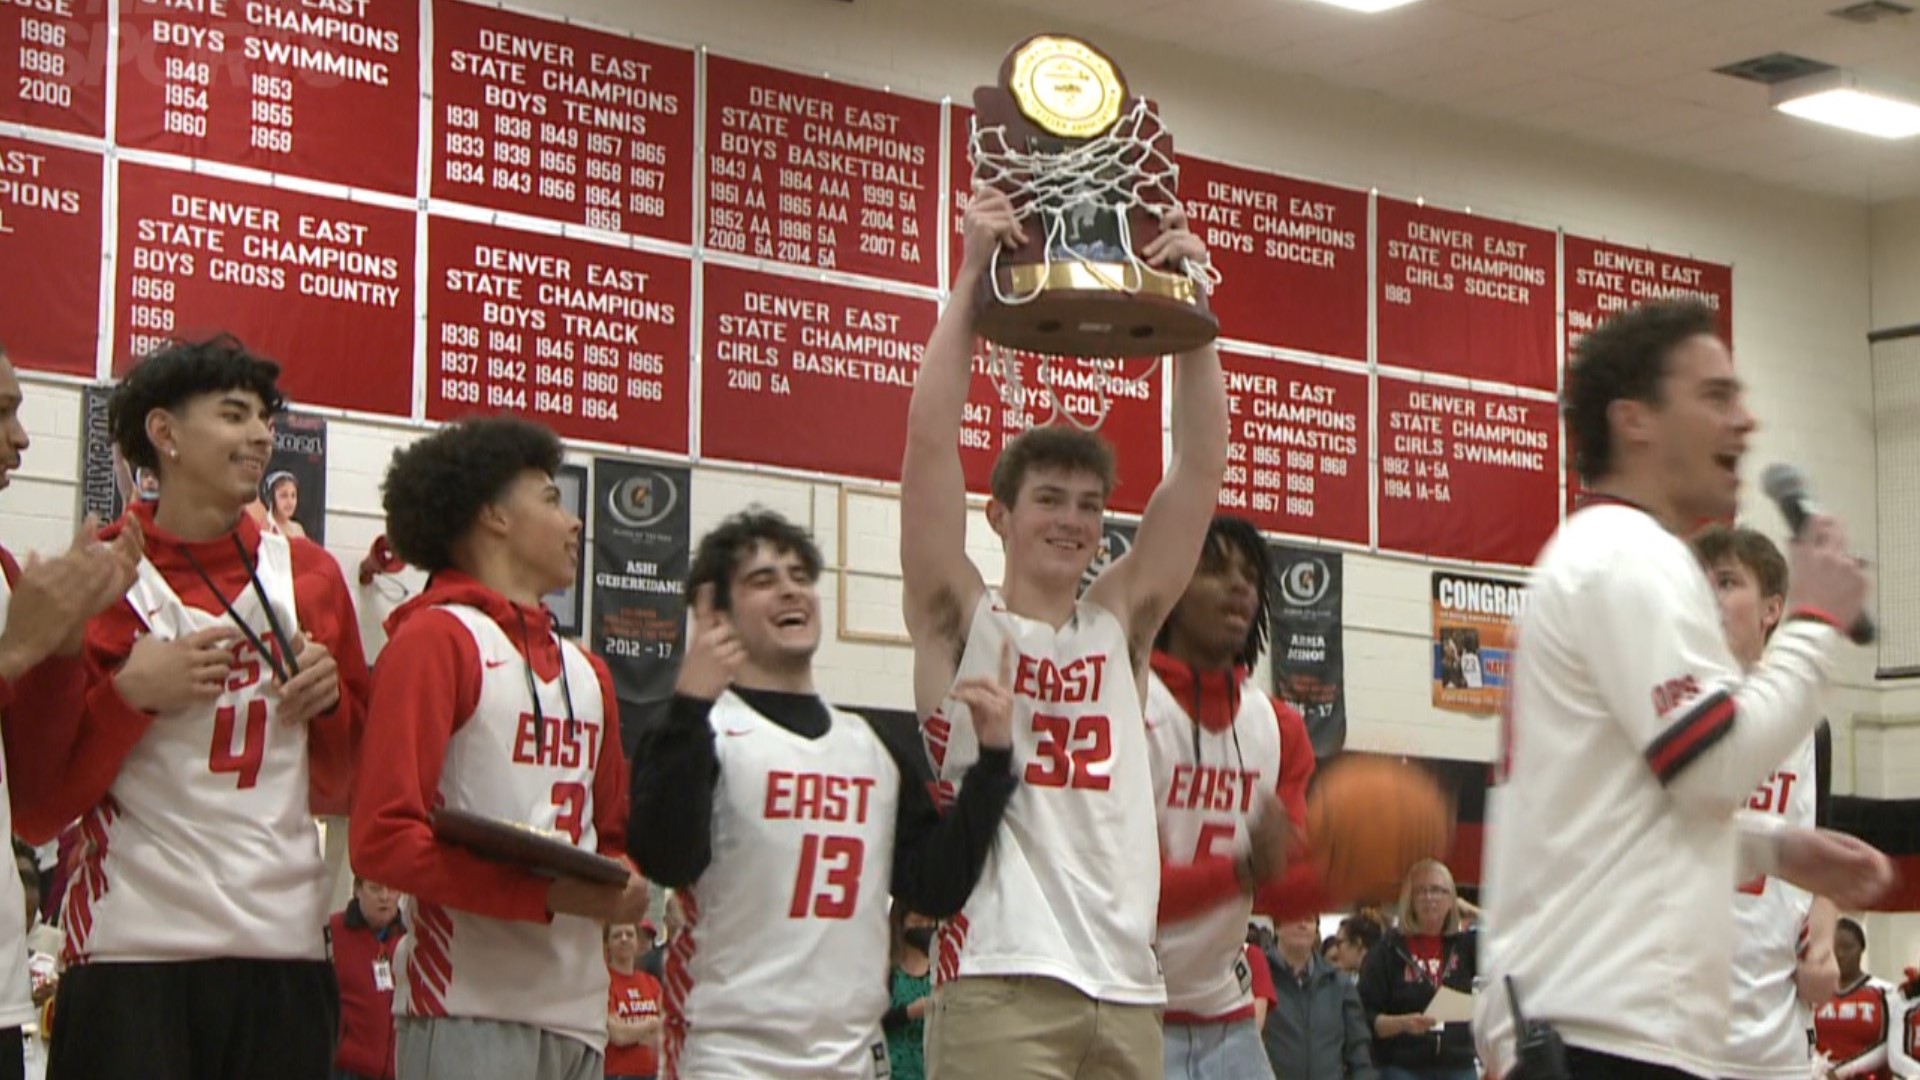 The Angels had a pep rally Monday to recognize the Class 6A boys basketball state championship